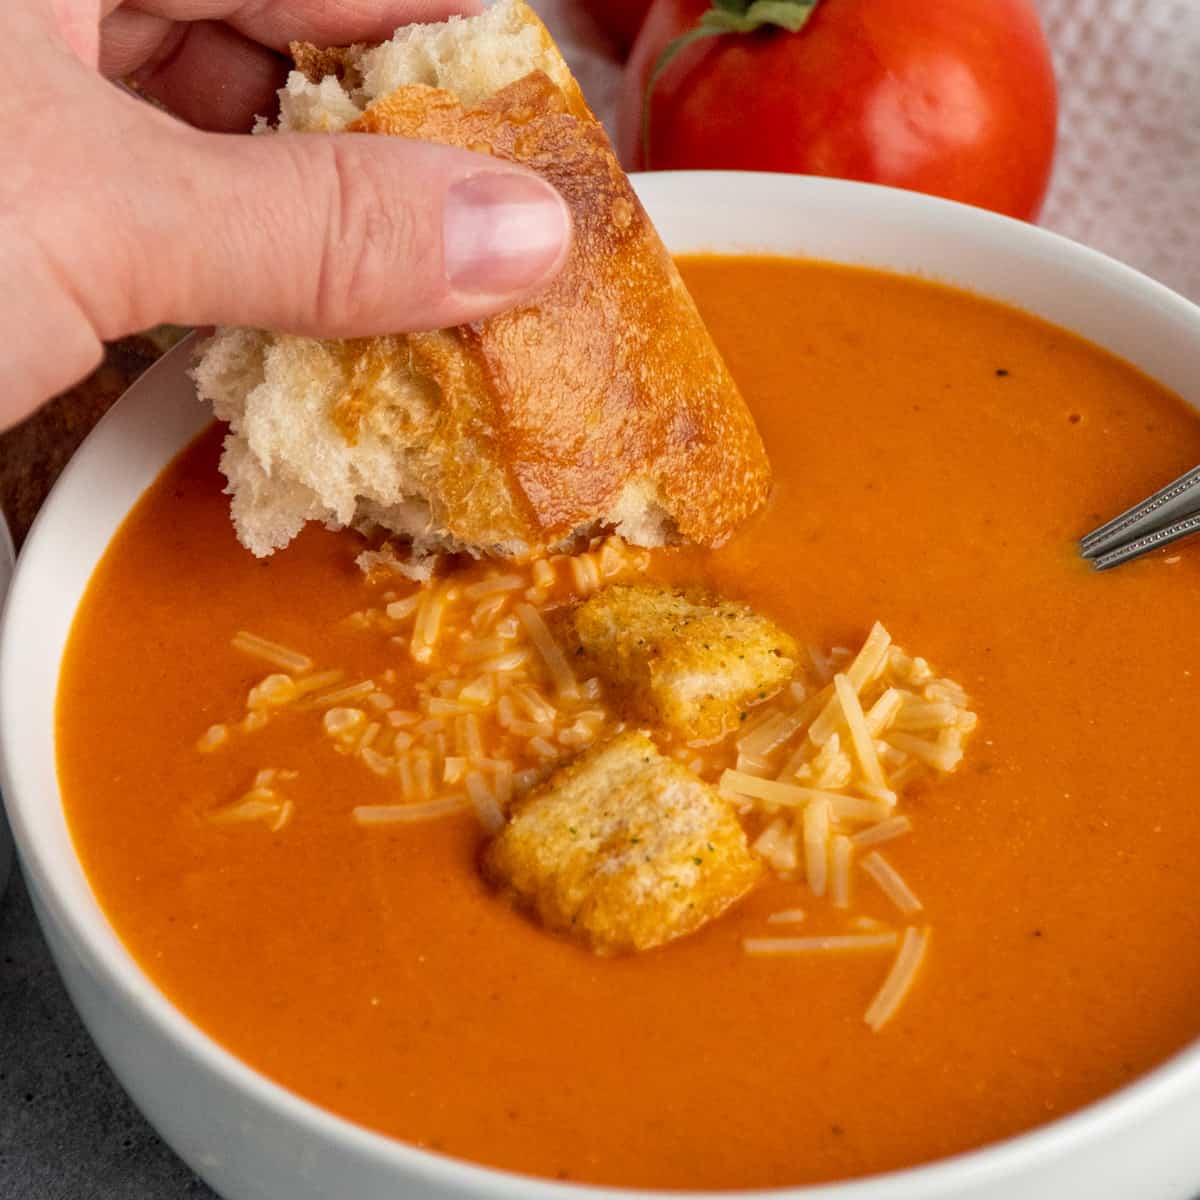 A hand dipping a piece of bread into a bowl of tomato soup.